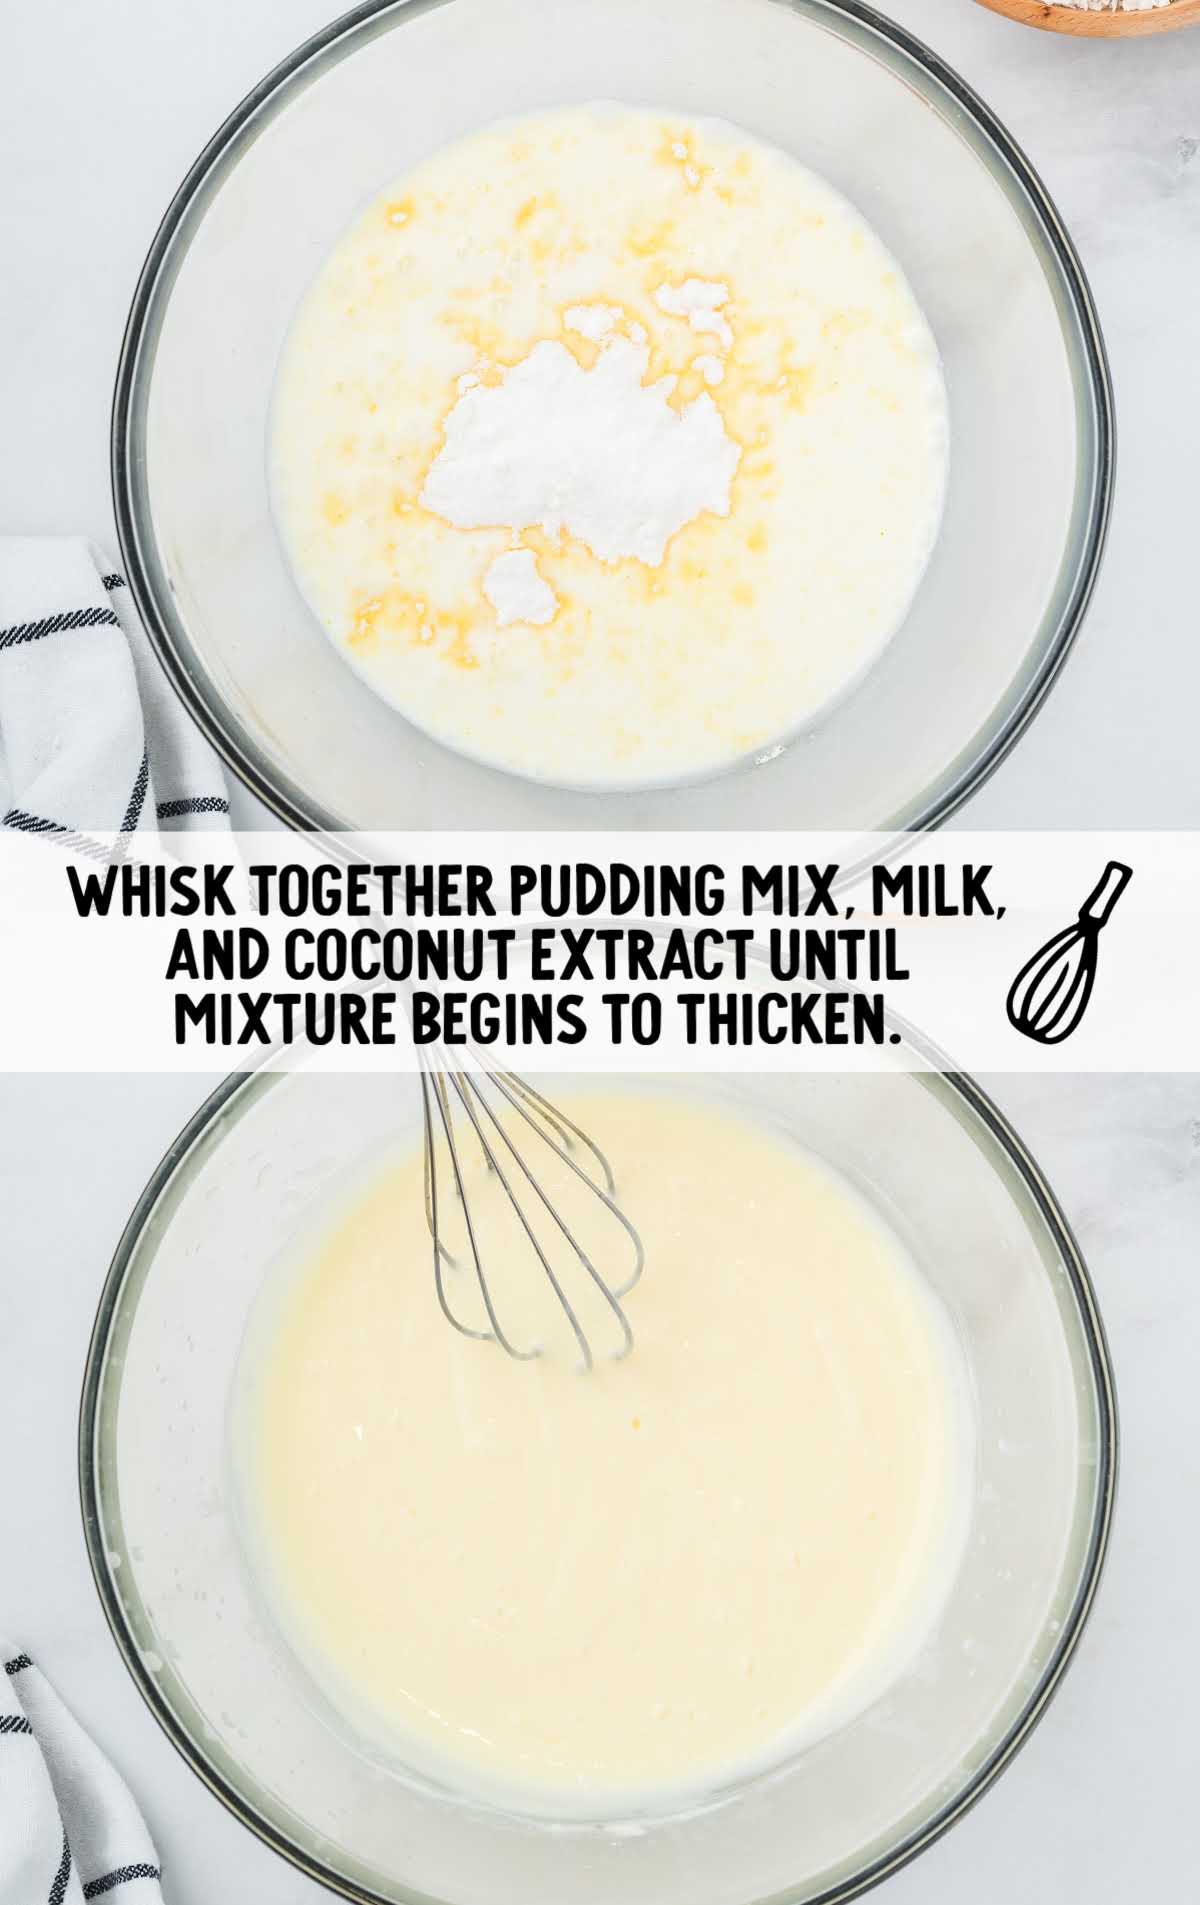 pudding mix, milk, and coconut extract whisked together in a bowl